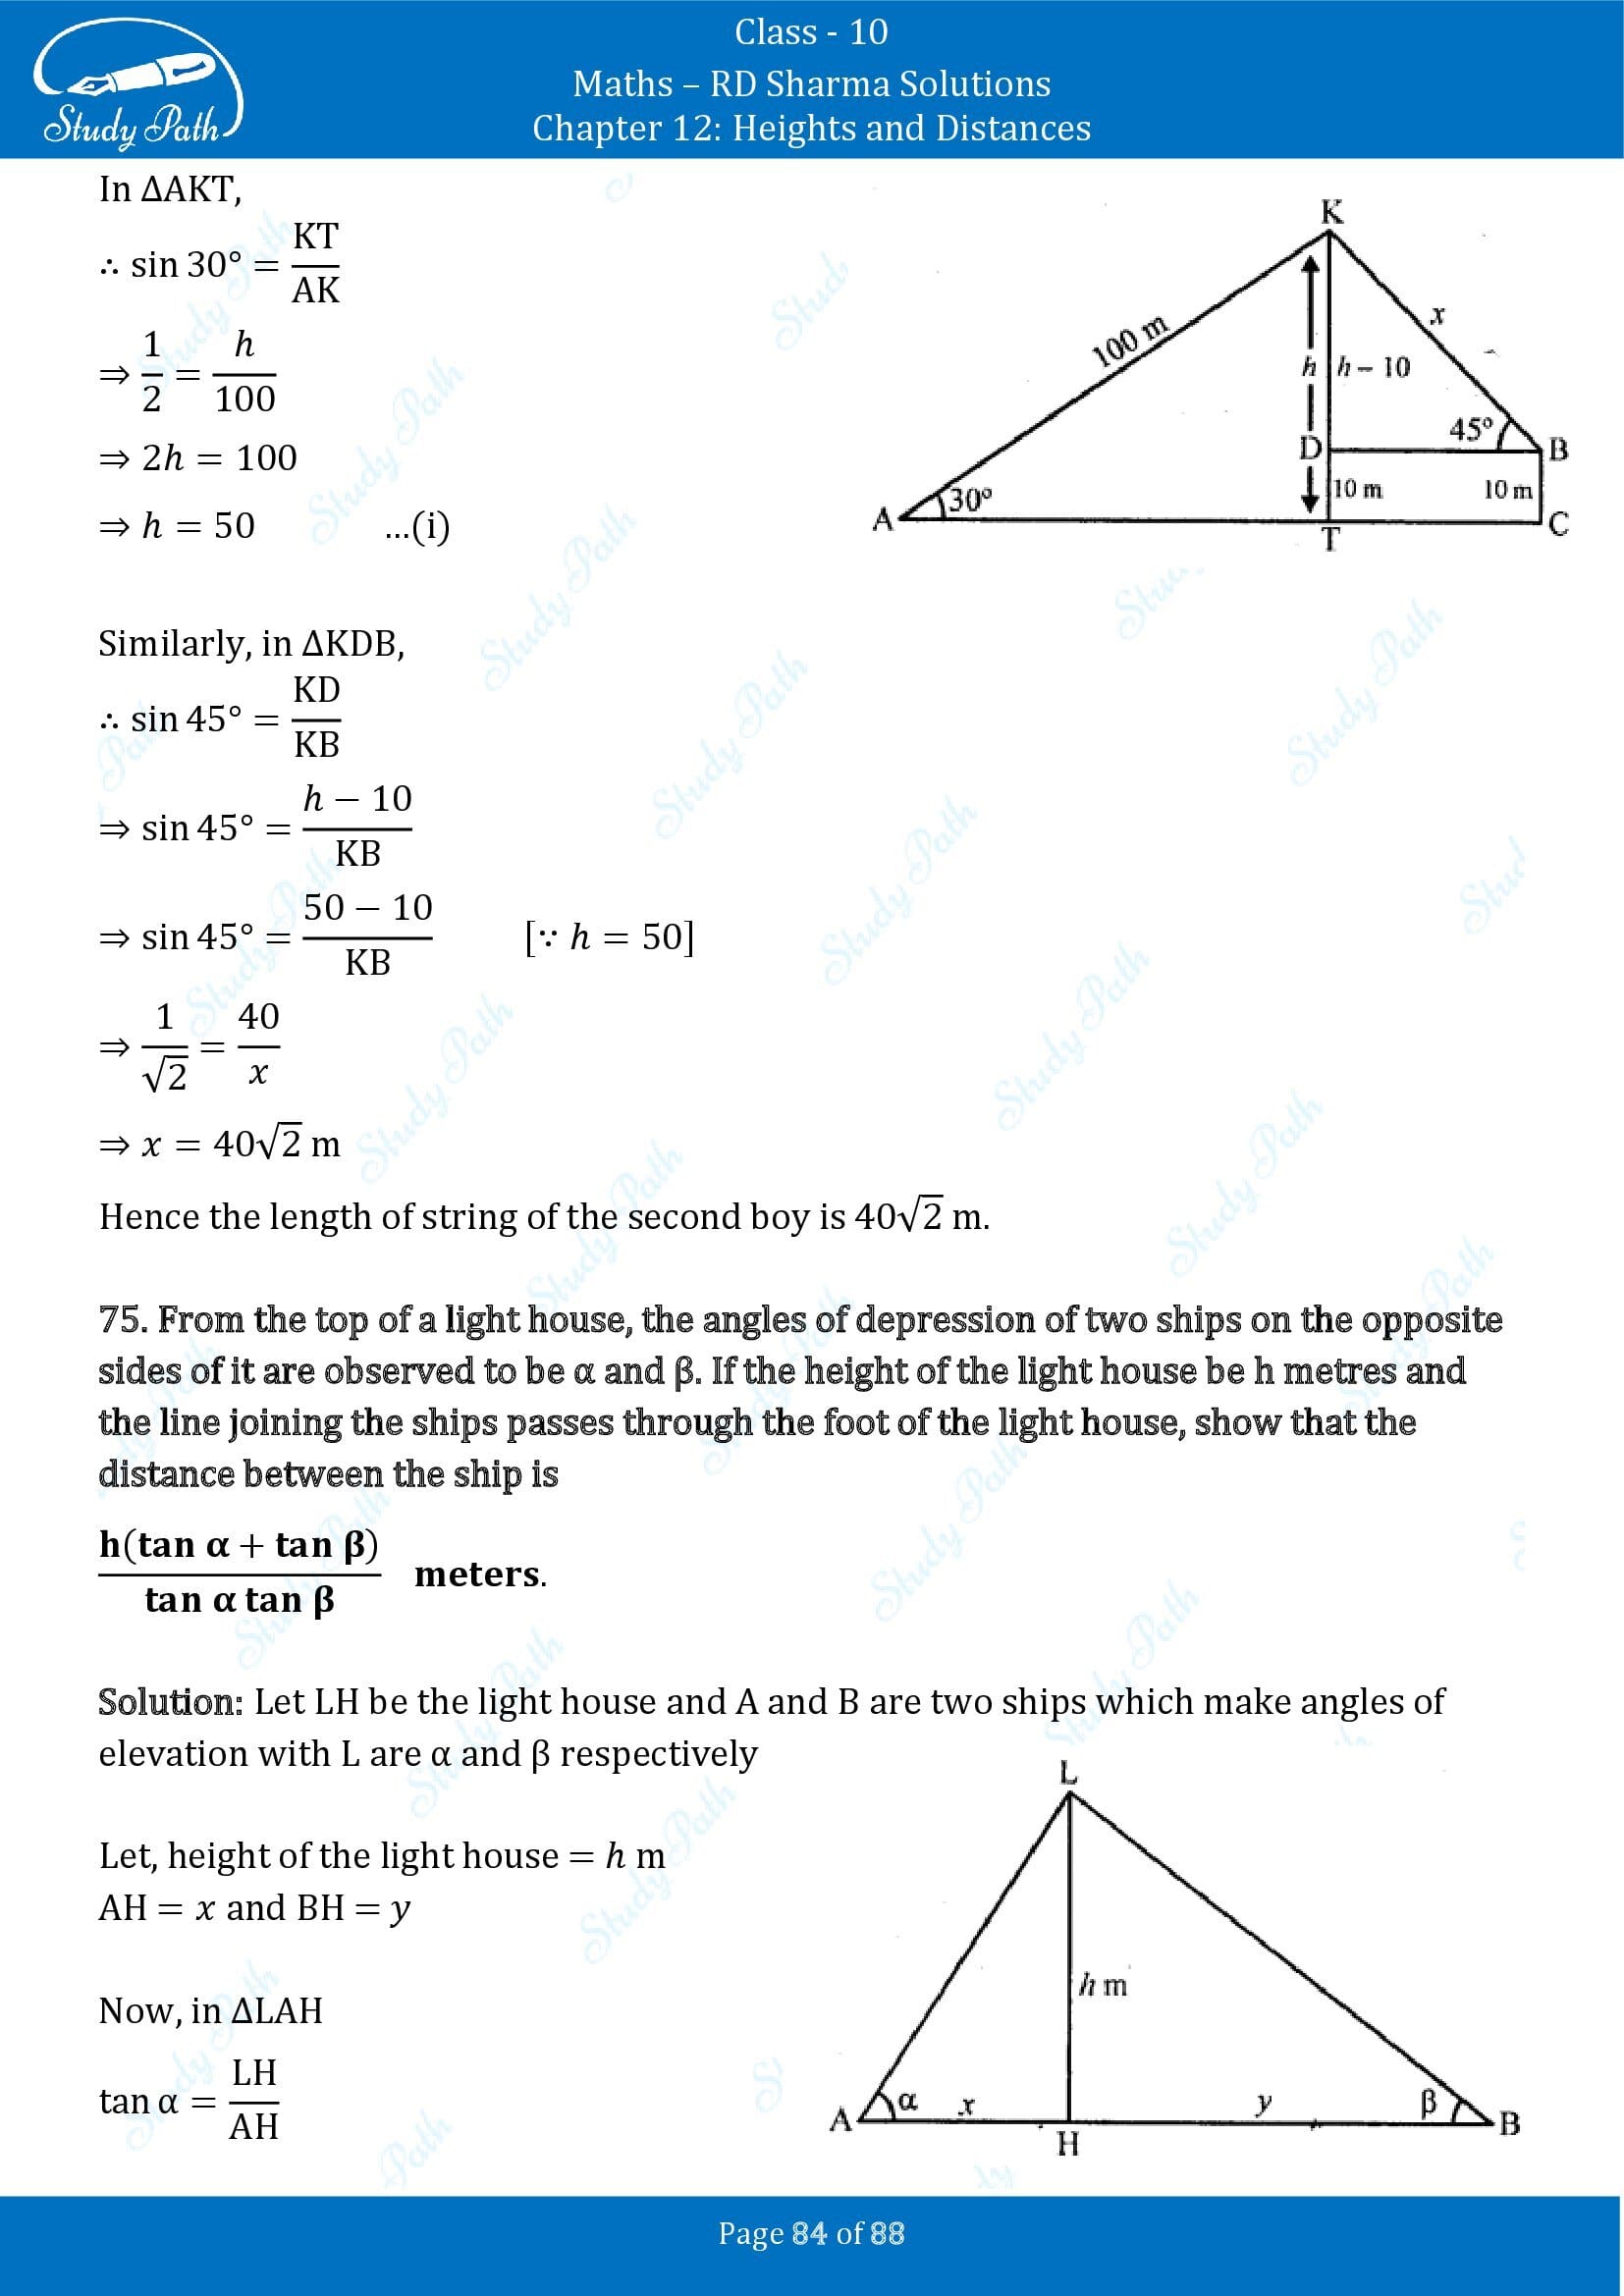 RD Sharma Solutions Class 10 Chapter 12 Heights and Distances Exercise 12.1 00084